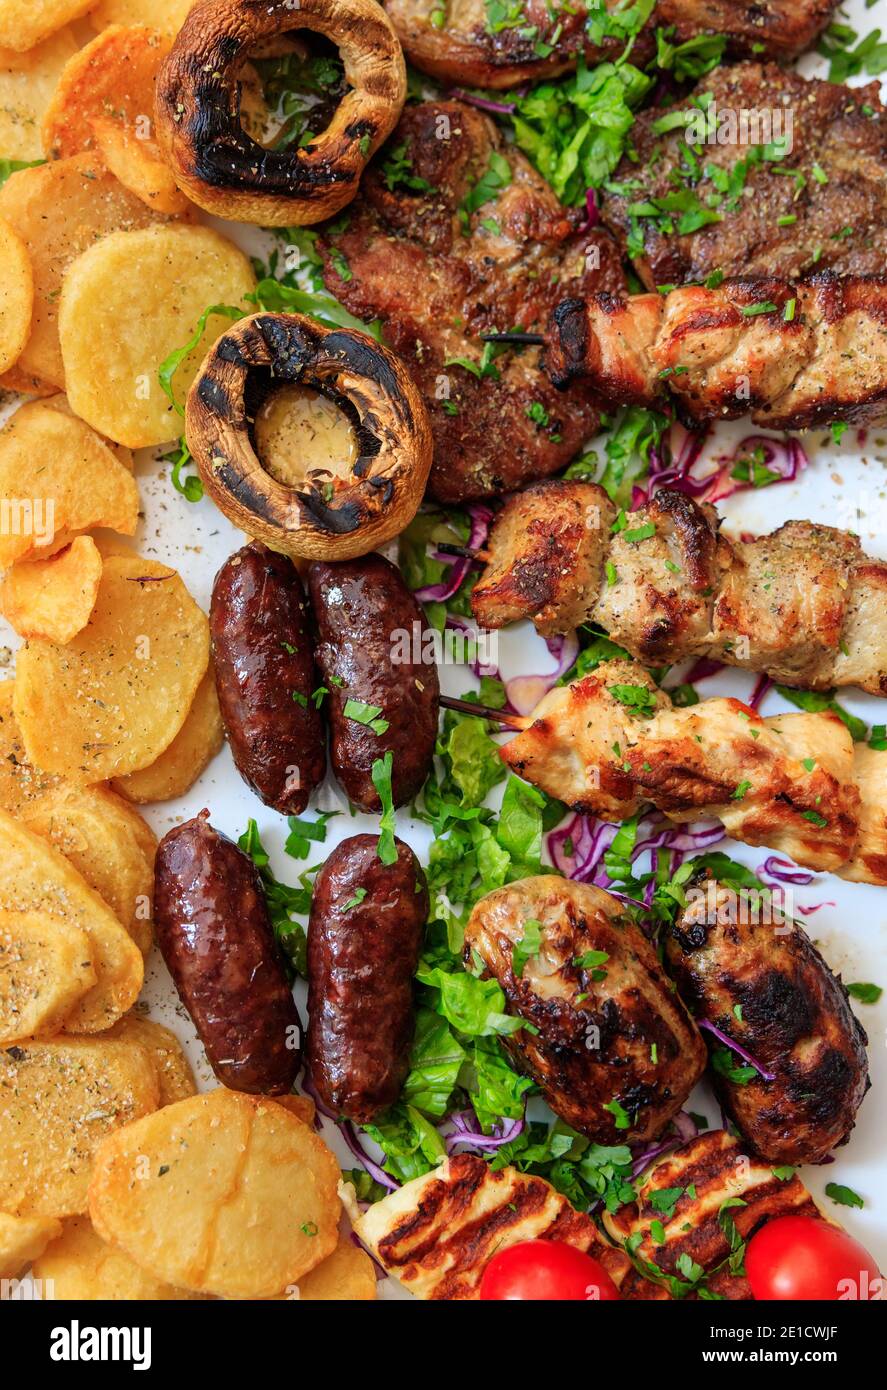 Kebab, seftalies, chicken, steak, lamb, sausage, pork, beef, ypriot delicacies restaurant dish background. Mixed grilled meat with vegetables and pota Stock Photo